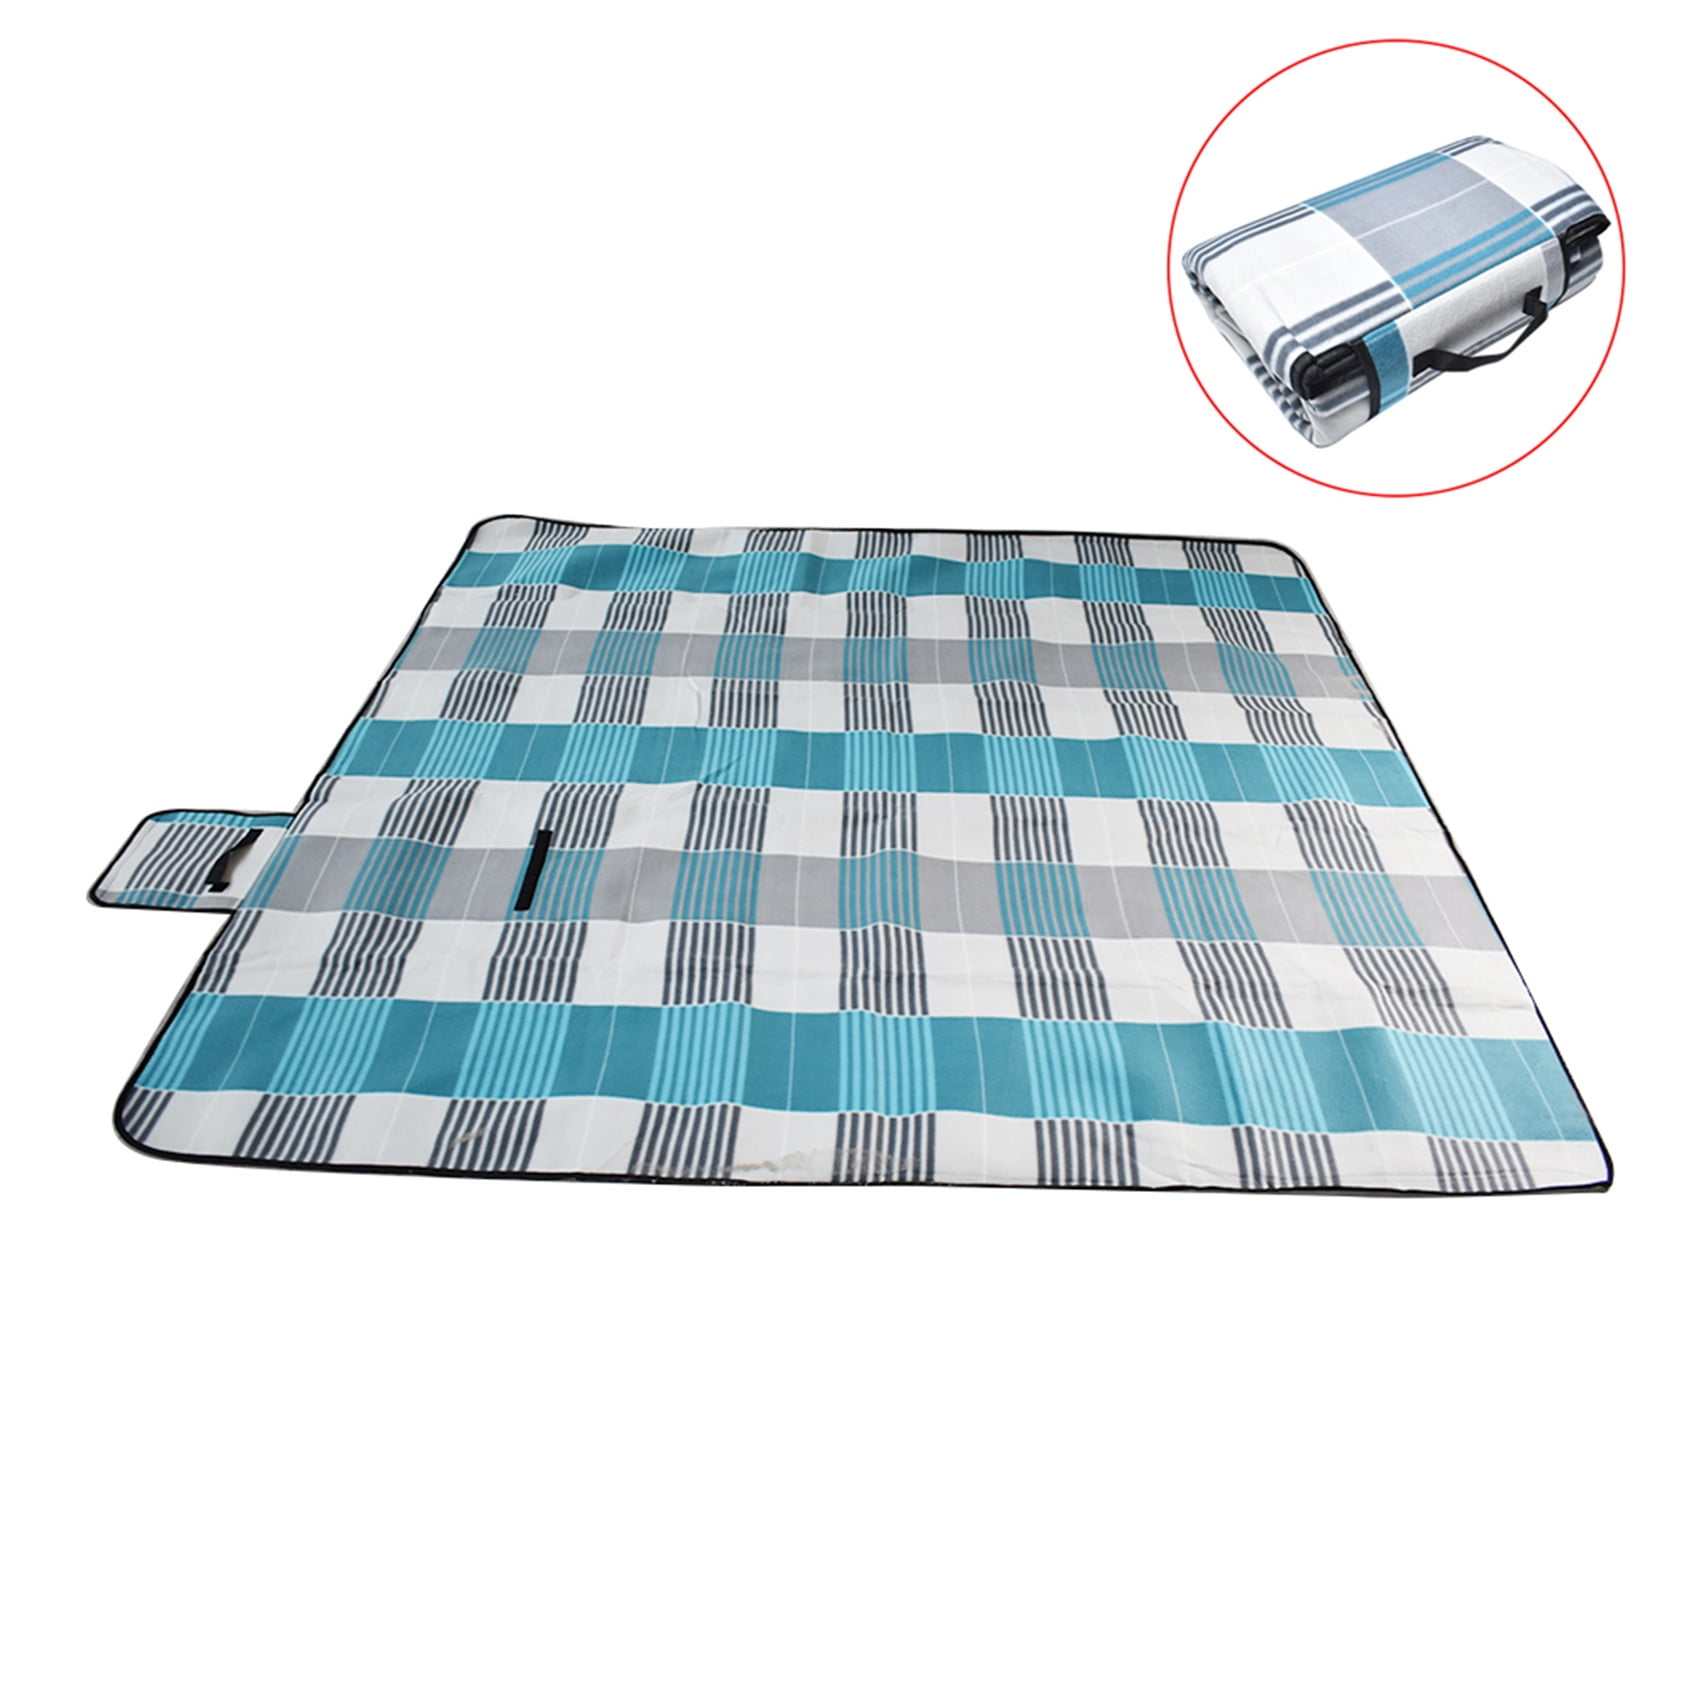 Extra Large 3-Layers Soft Picnic Blanket Rug Waterproof Mat Camping Beach78x78in